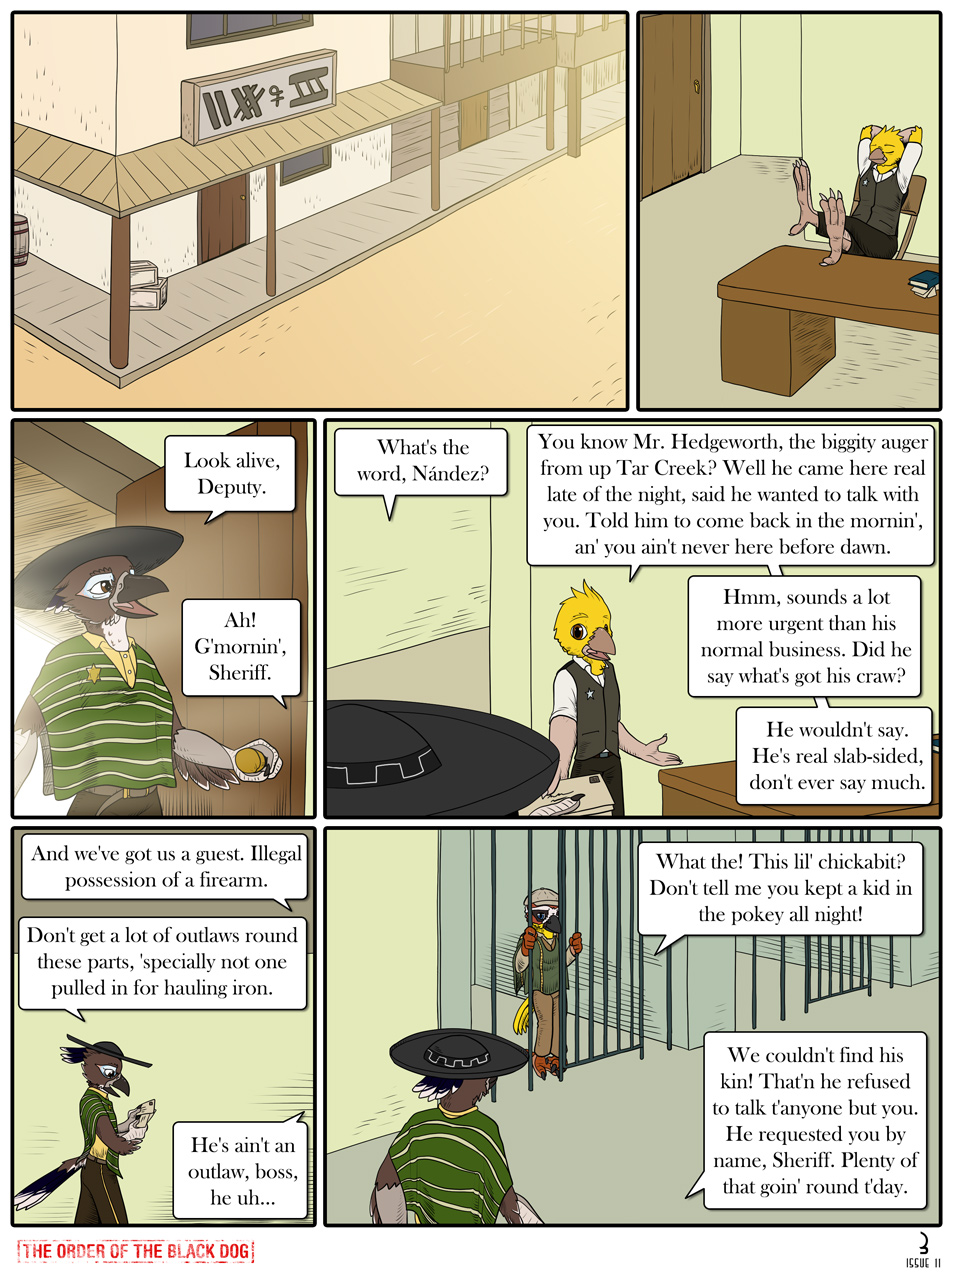 Issue 11, Page 3